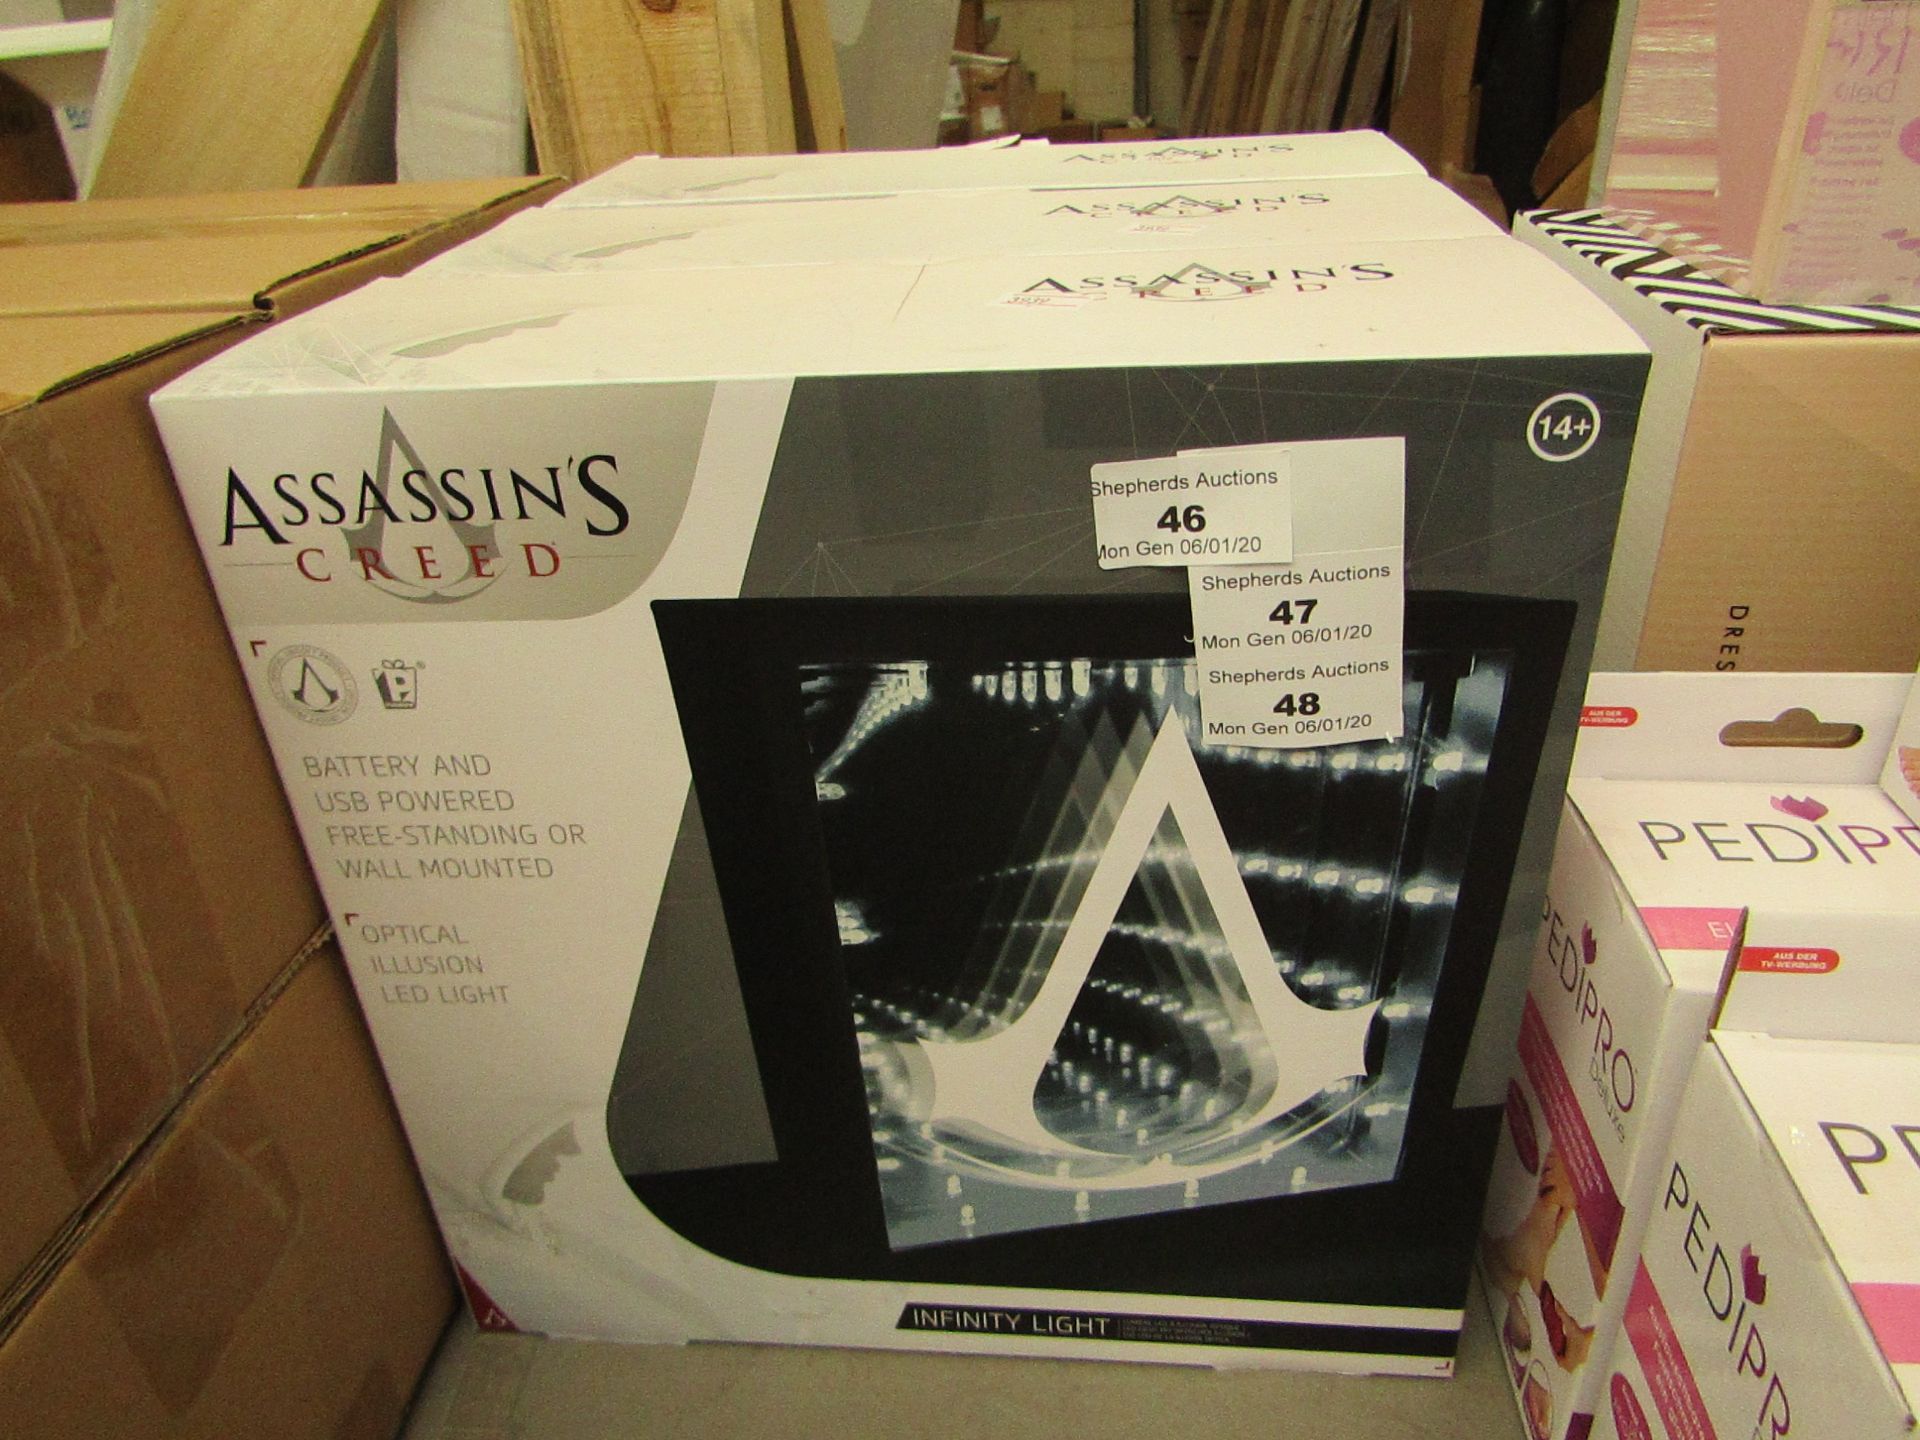 Assains Creed Optical Illusion LED Light new & packaged.